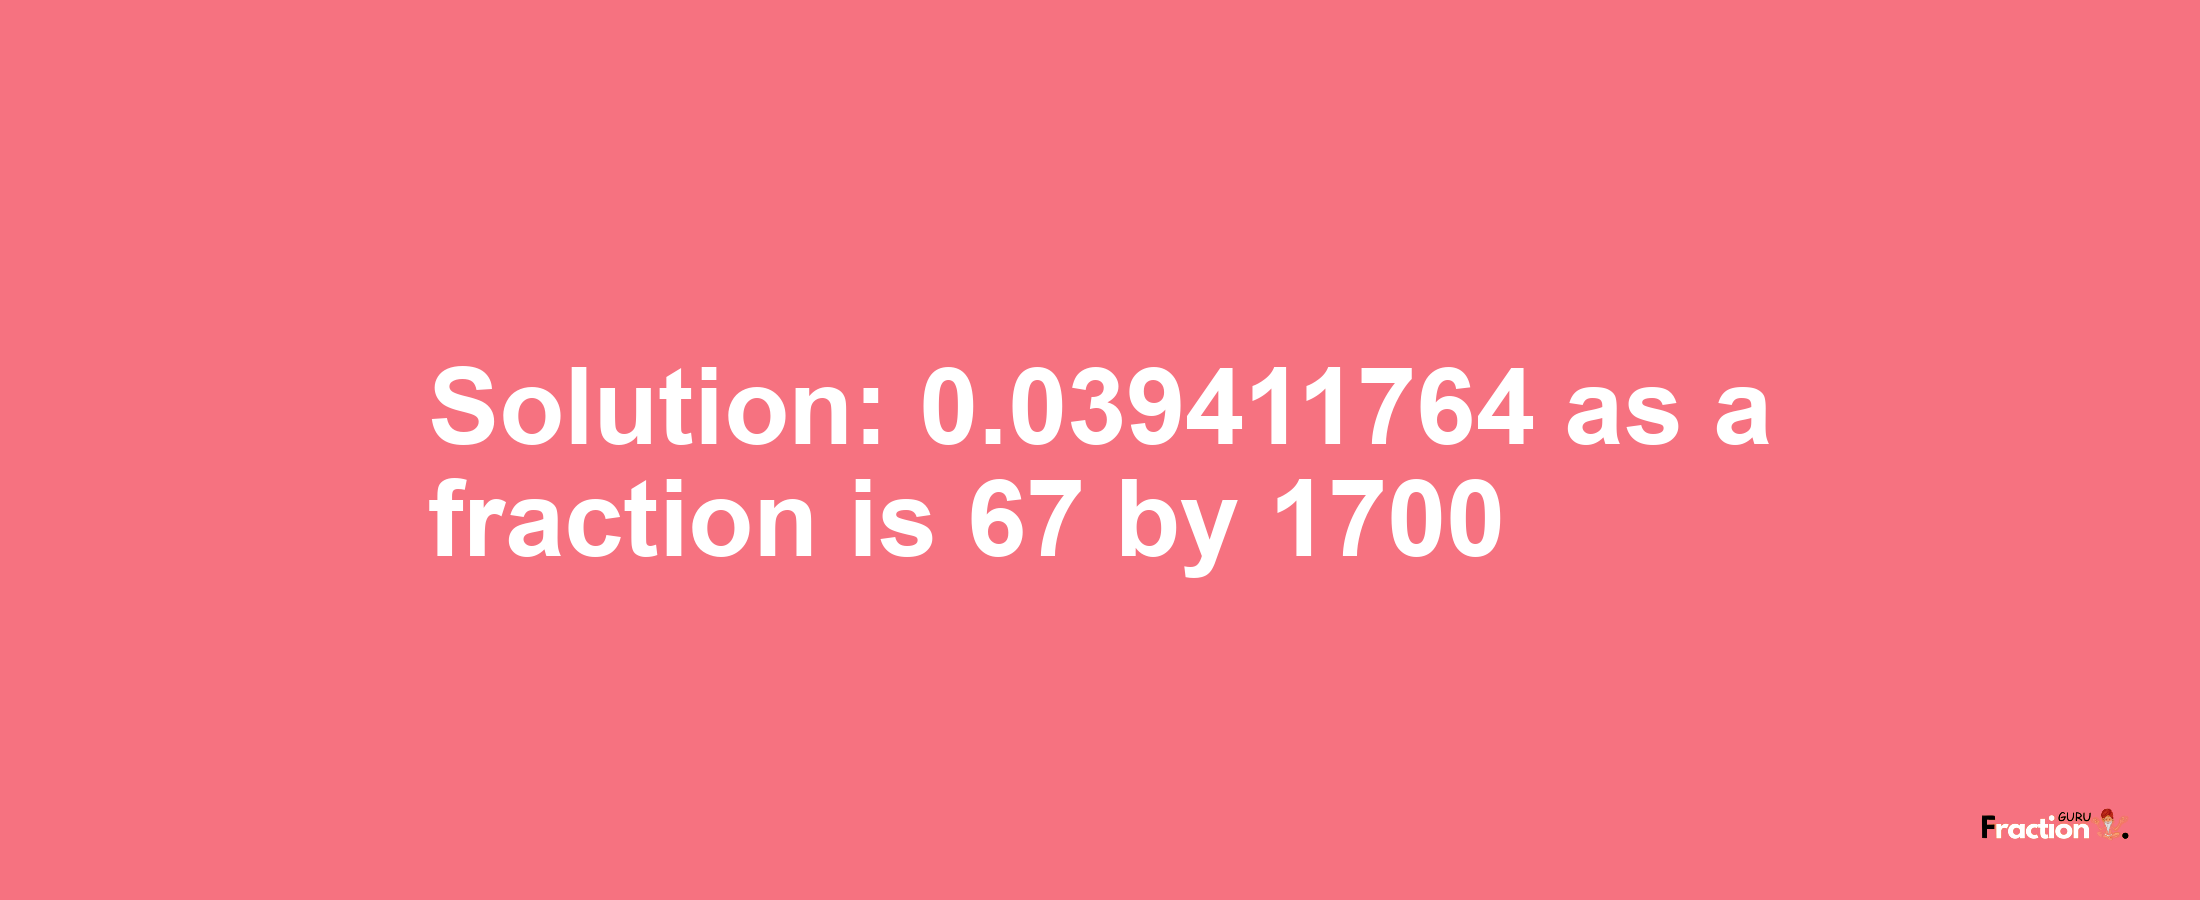 Solution:0.039411764 as a fraction is 67/1700